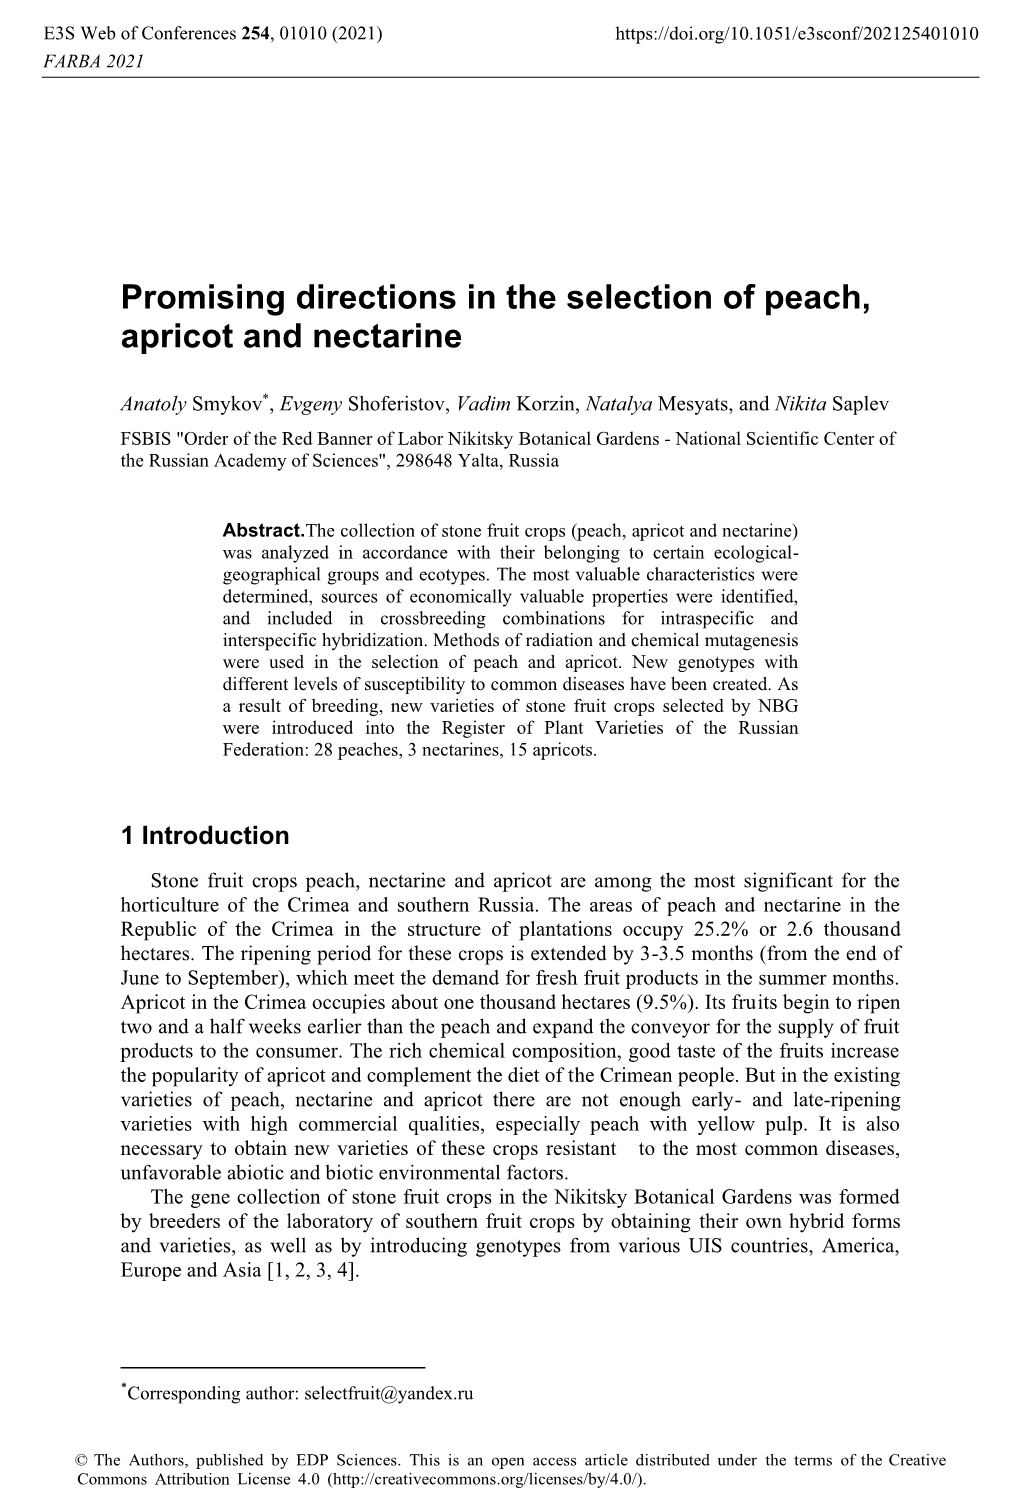 Promising Directions in the Selection of Peach, Apricot and Nectarine